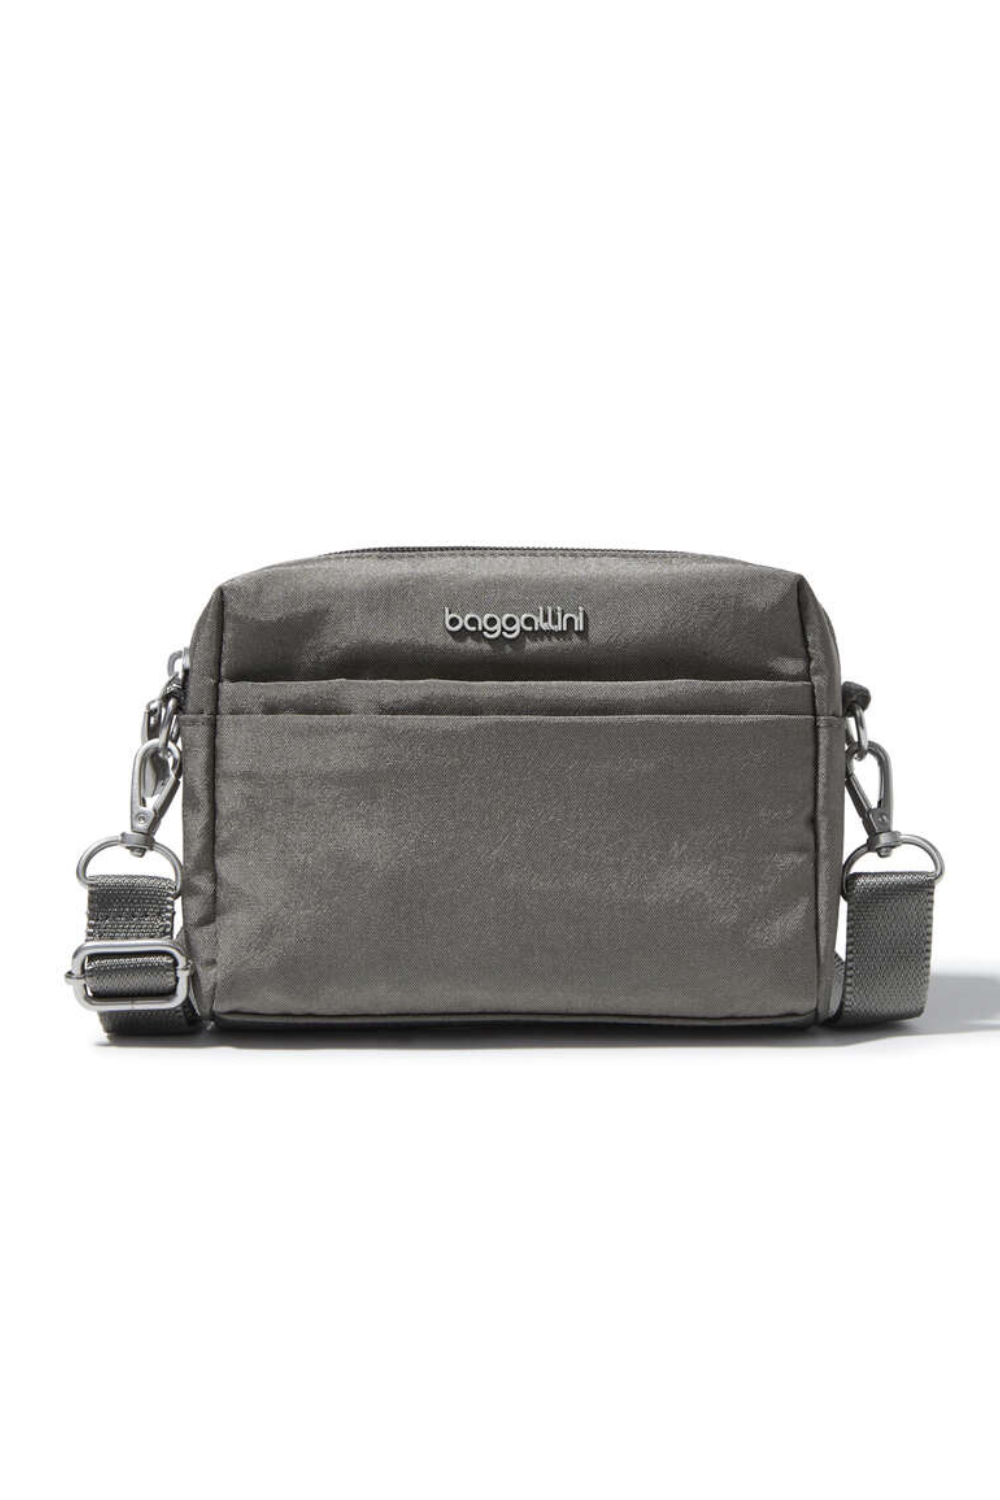 Baggallini 2-in-1 Convertible Belt Bag Midnight Blossom